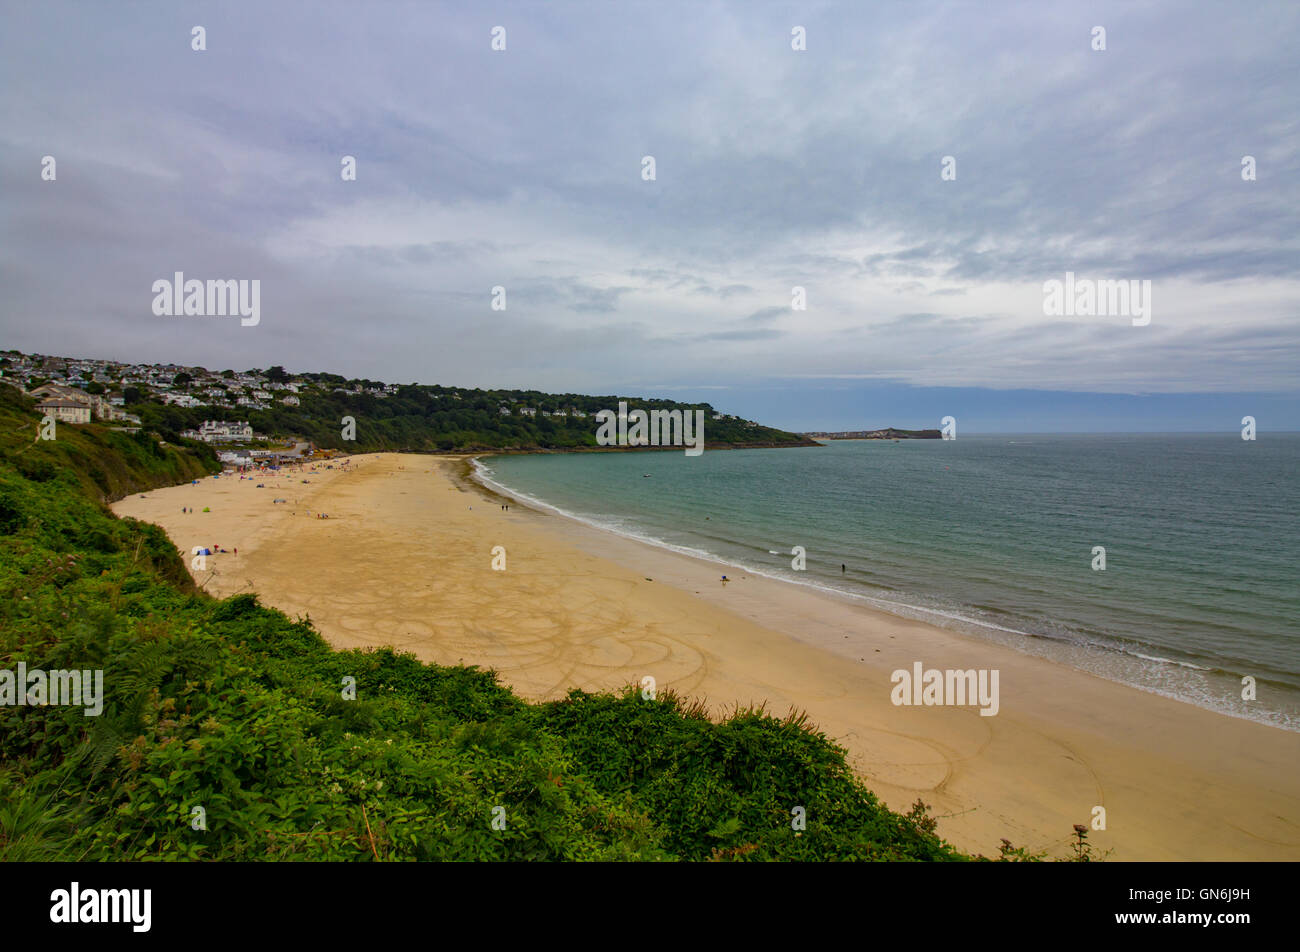 The golden sands at Carbis Bay, Cornwall captured on a moody summers day in the UK. Stock Photo